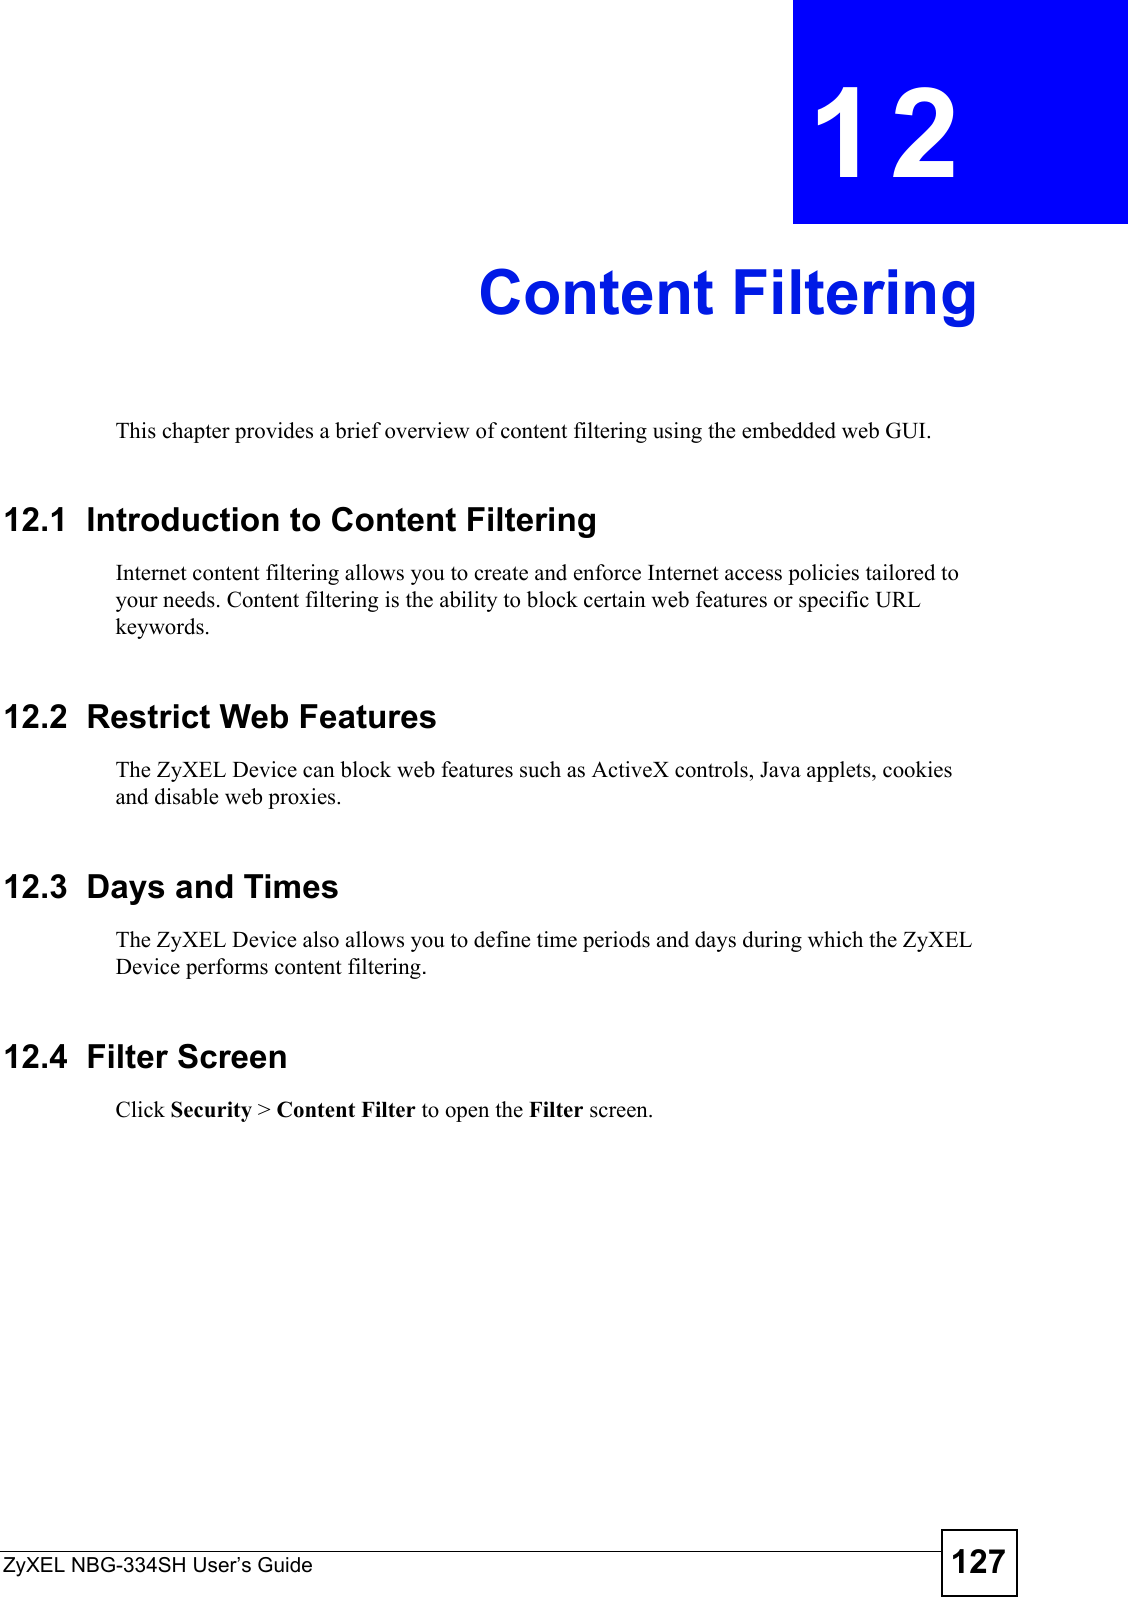 ZyXEL NBG-334SH User’s Guide 127CHAPTER  12 Content FilteringThis chapter provides a brief overview of content filtering using the embedded web GUI.12.1  Introduction to Content FilteringInternet content filtering allows you to create and enforce Internet access policies tailored to your needs. Content filtering is the ability to block certain web features or specific URL keywords.12.2  Restrict Web FeaturesThe ZyXEL Device can block web features such as ActiveX controls, Java applets, cookies and disable web proxies. 12.3  Days and TimesThe ZyXEL Device also allows you to define time periods and days during which the ZyXEL Device performs content filtering.12.4  Filter ScreenClick Security &gt; Content Filter to open the Filter screen. 